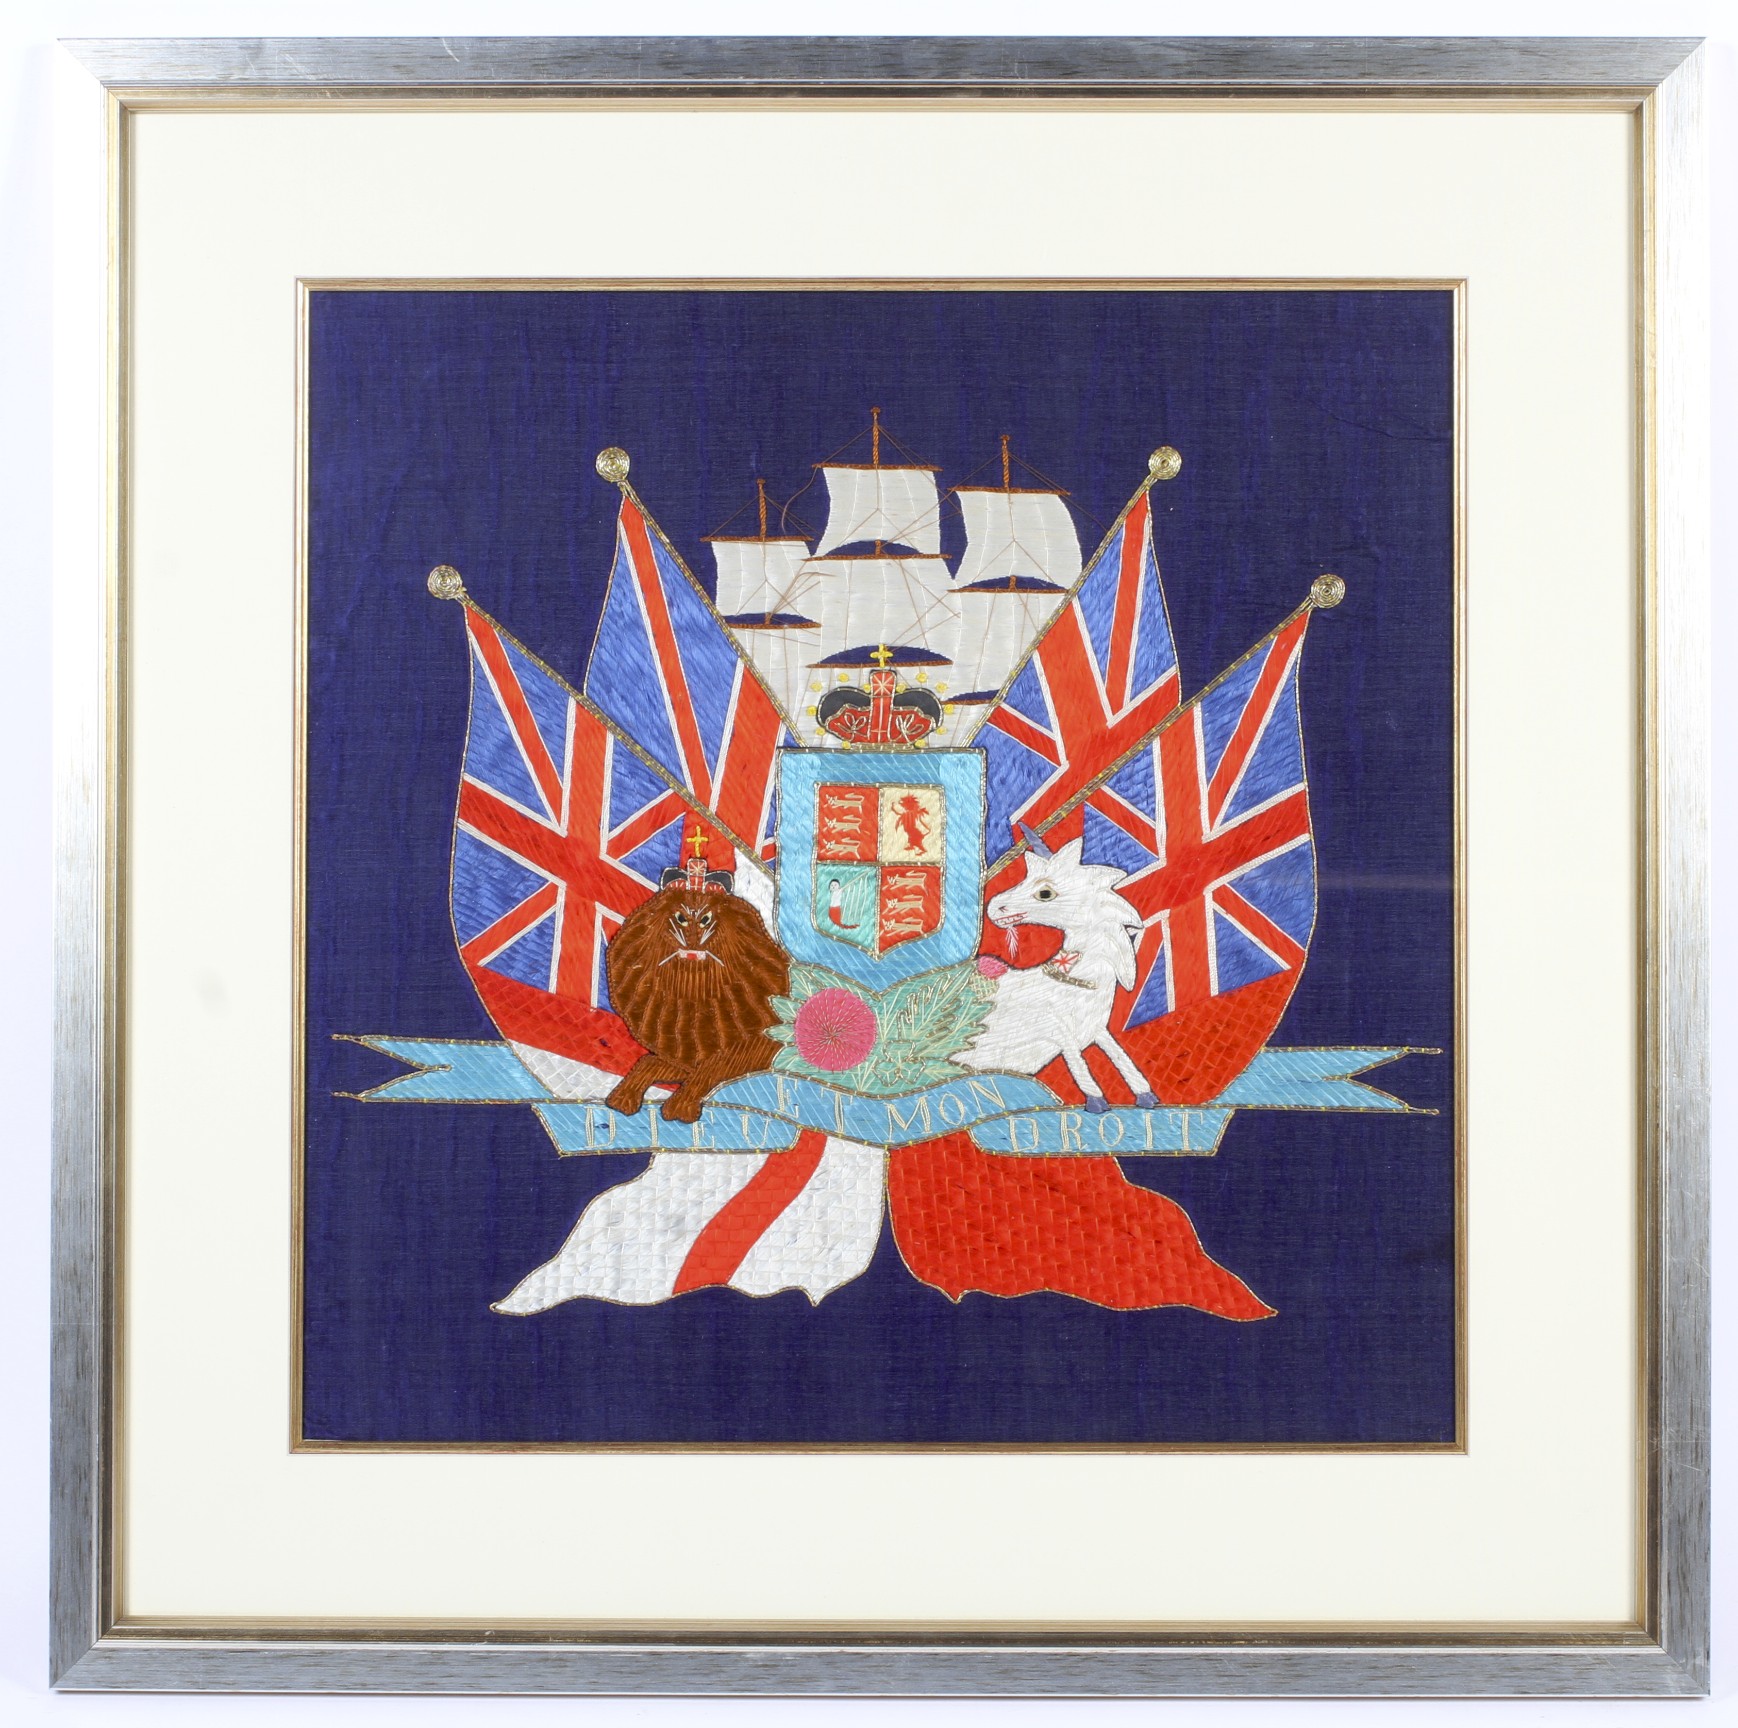 A fine military needlework coat of arms.